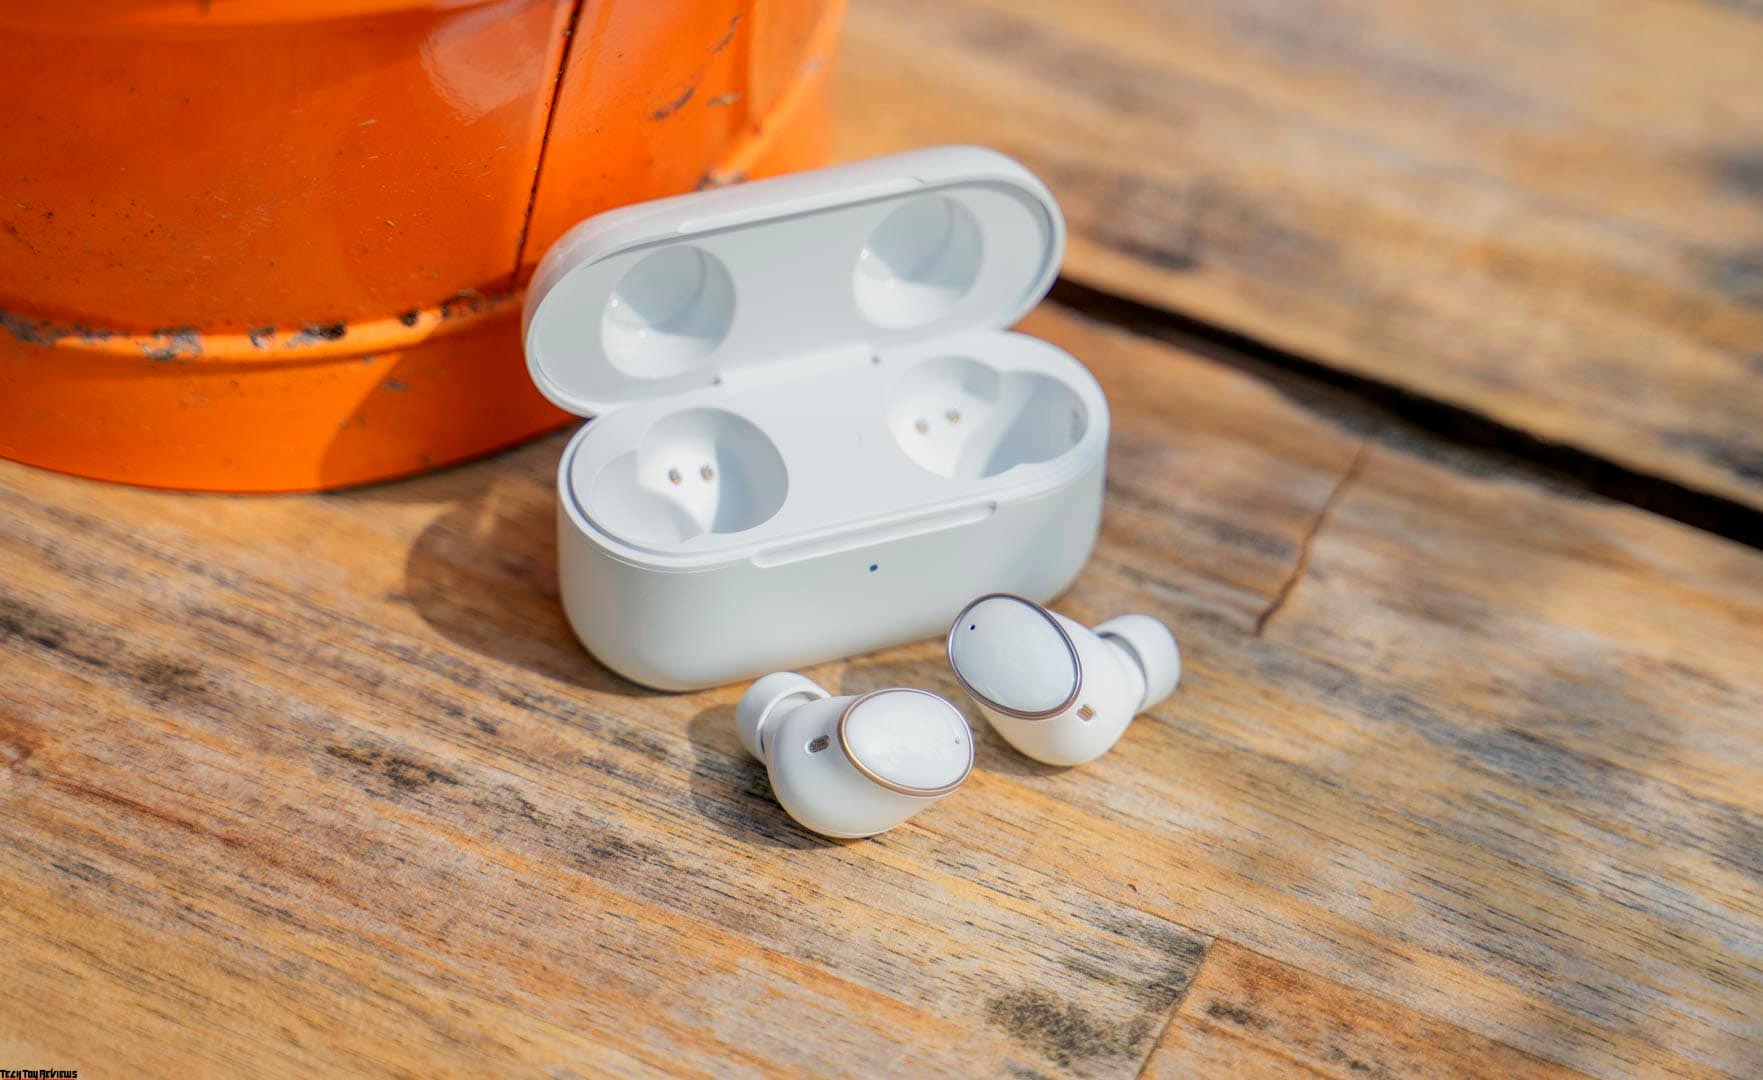 Sony WF-1000XM4 review: Excellent earbuds, awkward fit